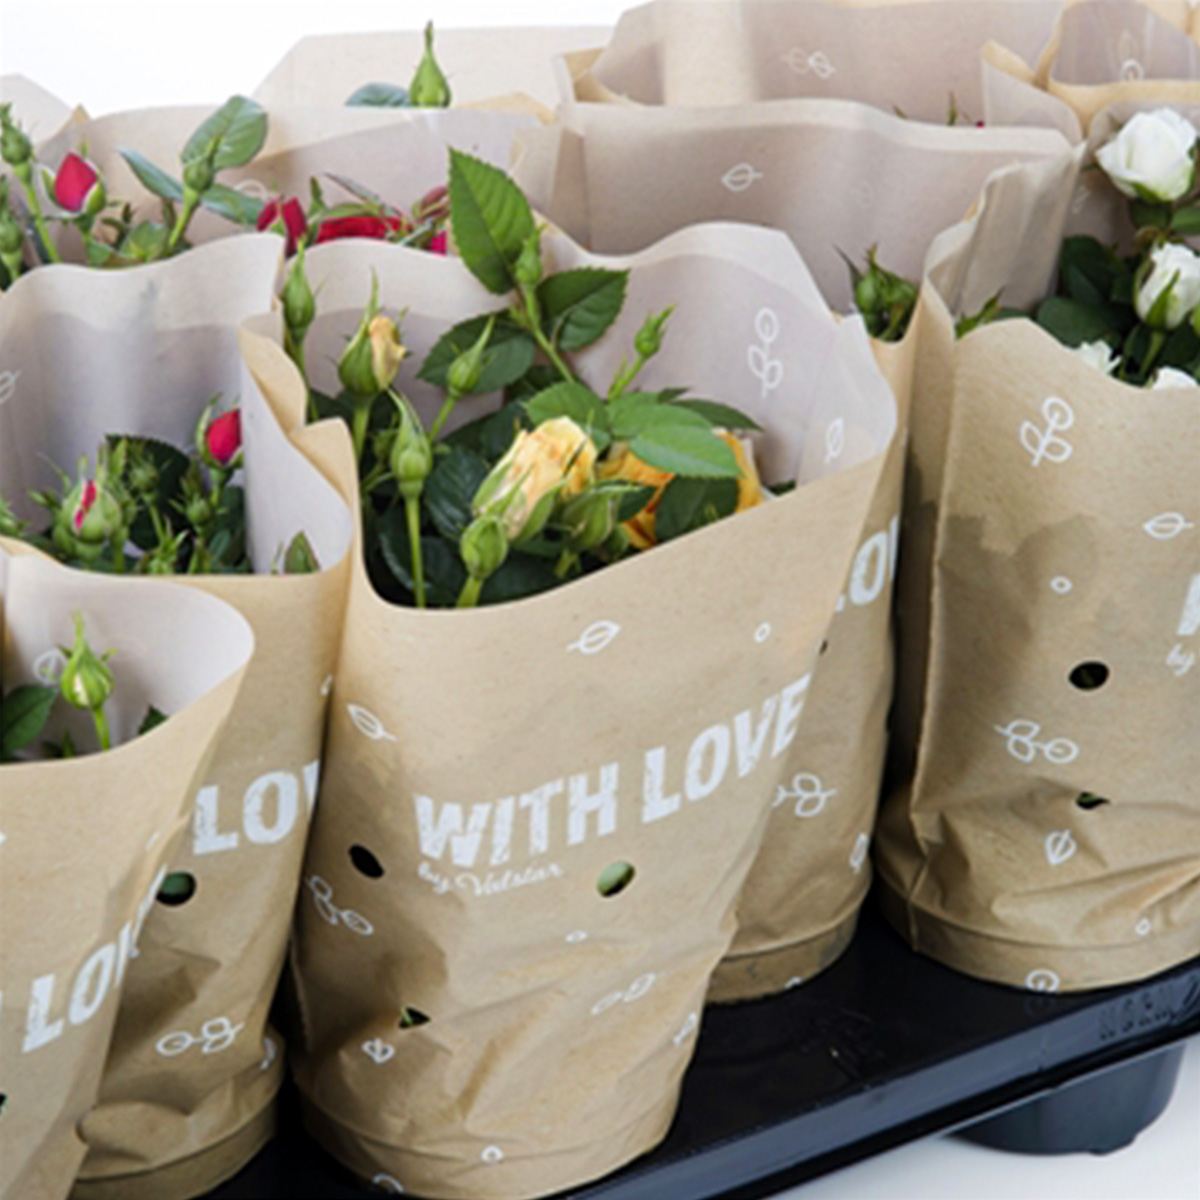 What Do Growers Think of Jewel Pot Roses From De Ruiter 22